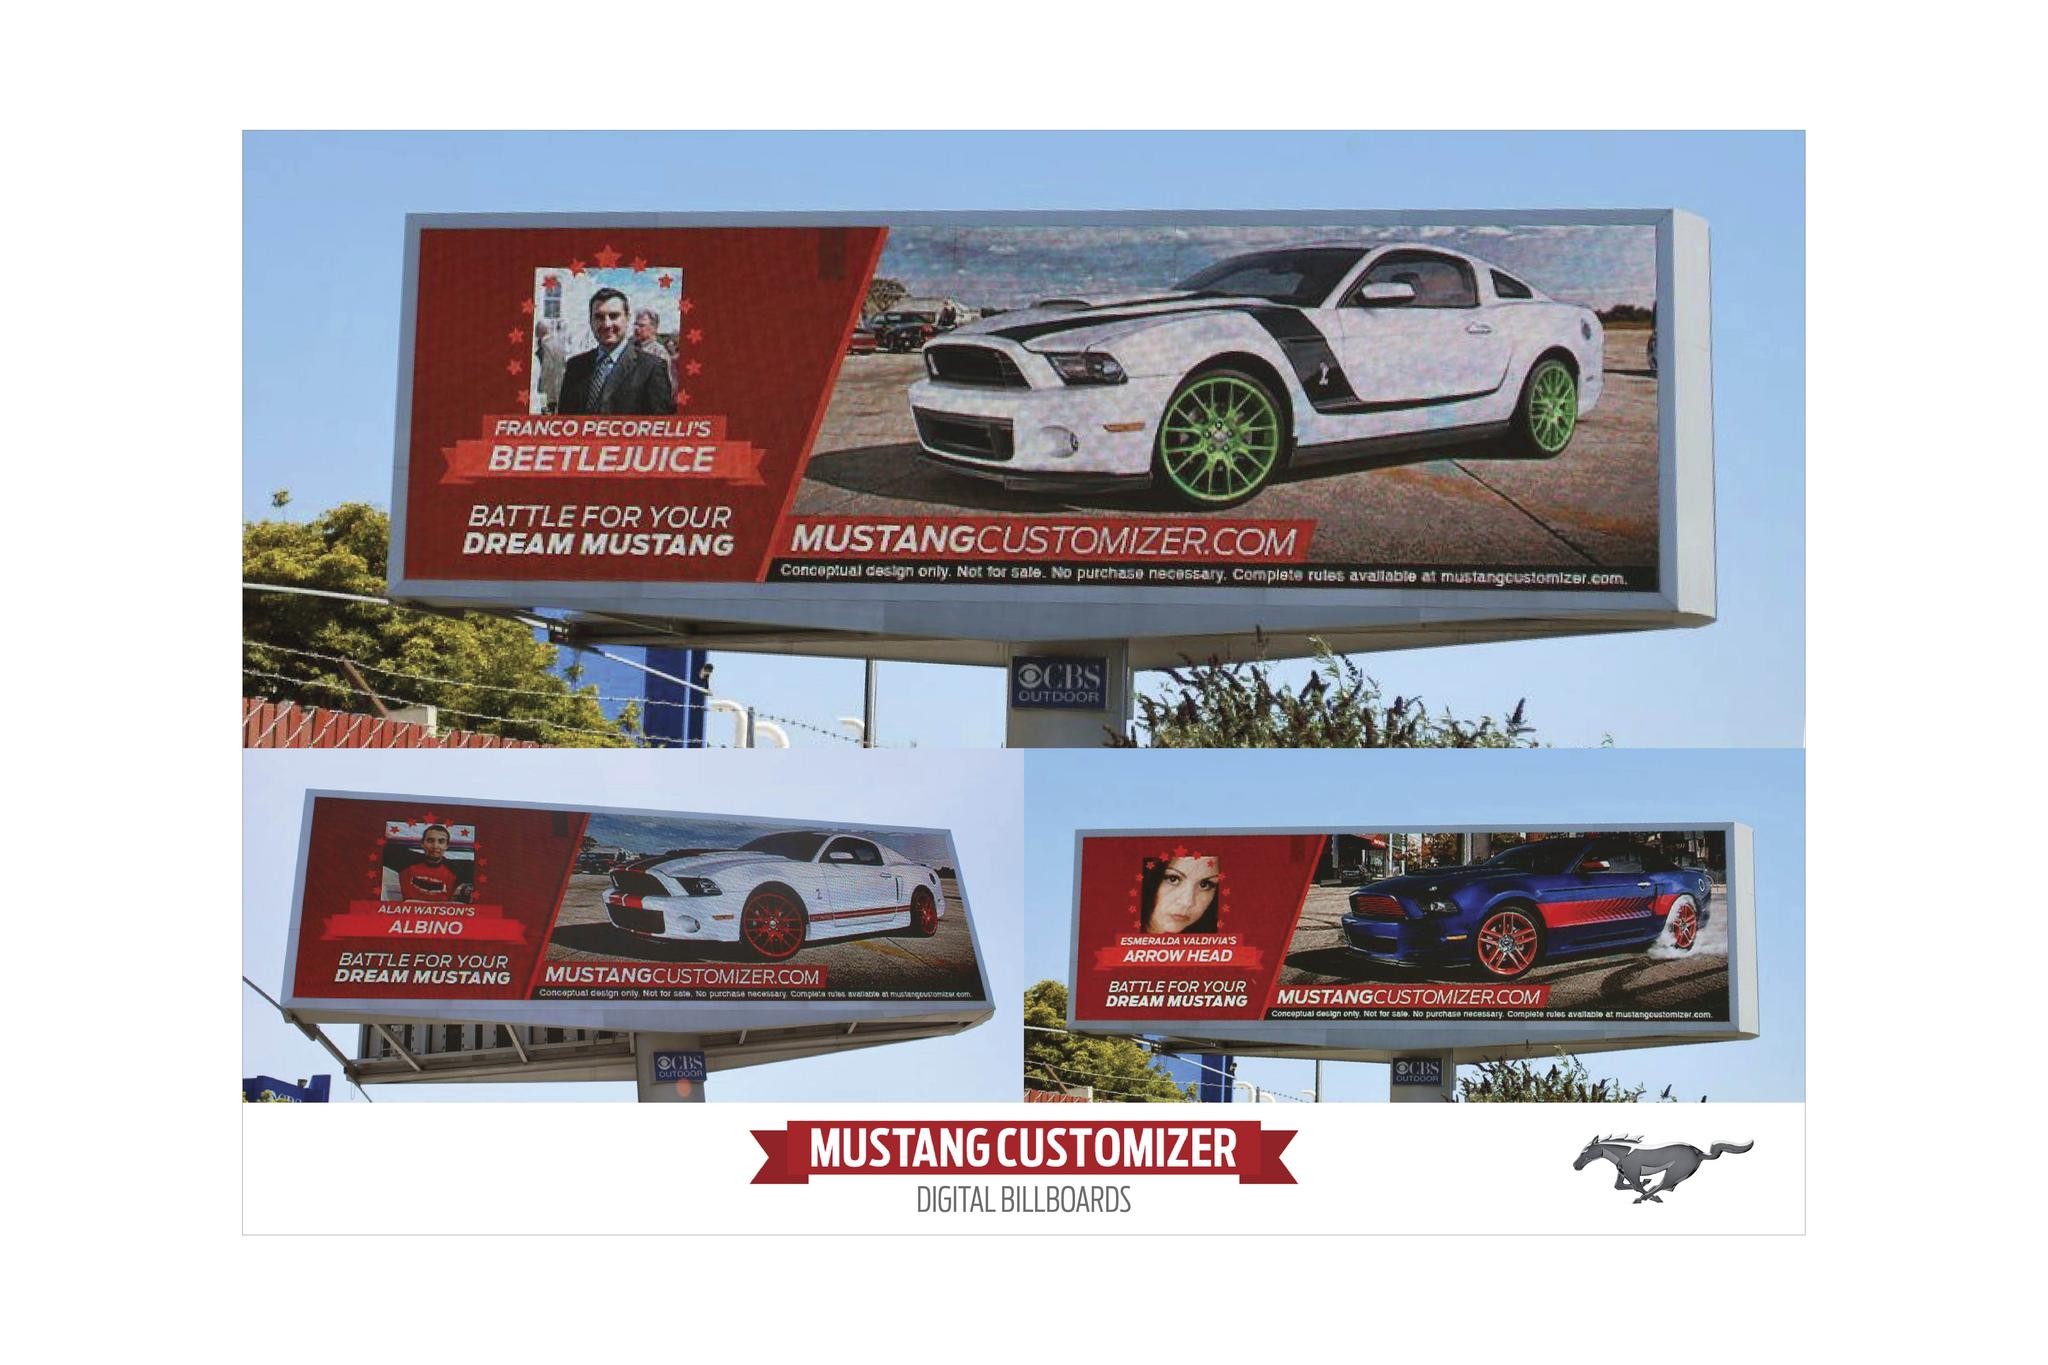 MUSTANG CUSTOMIZER PERSONALIZED BILLBOARDS